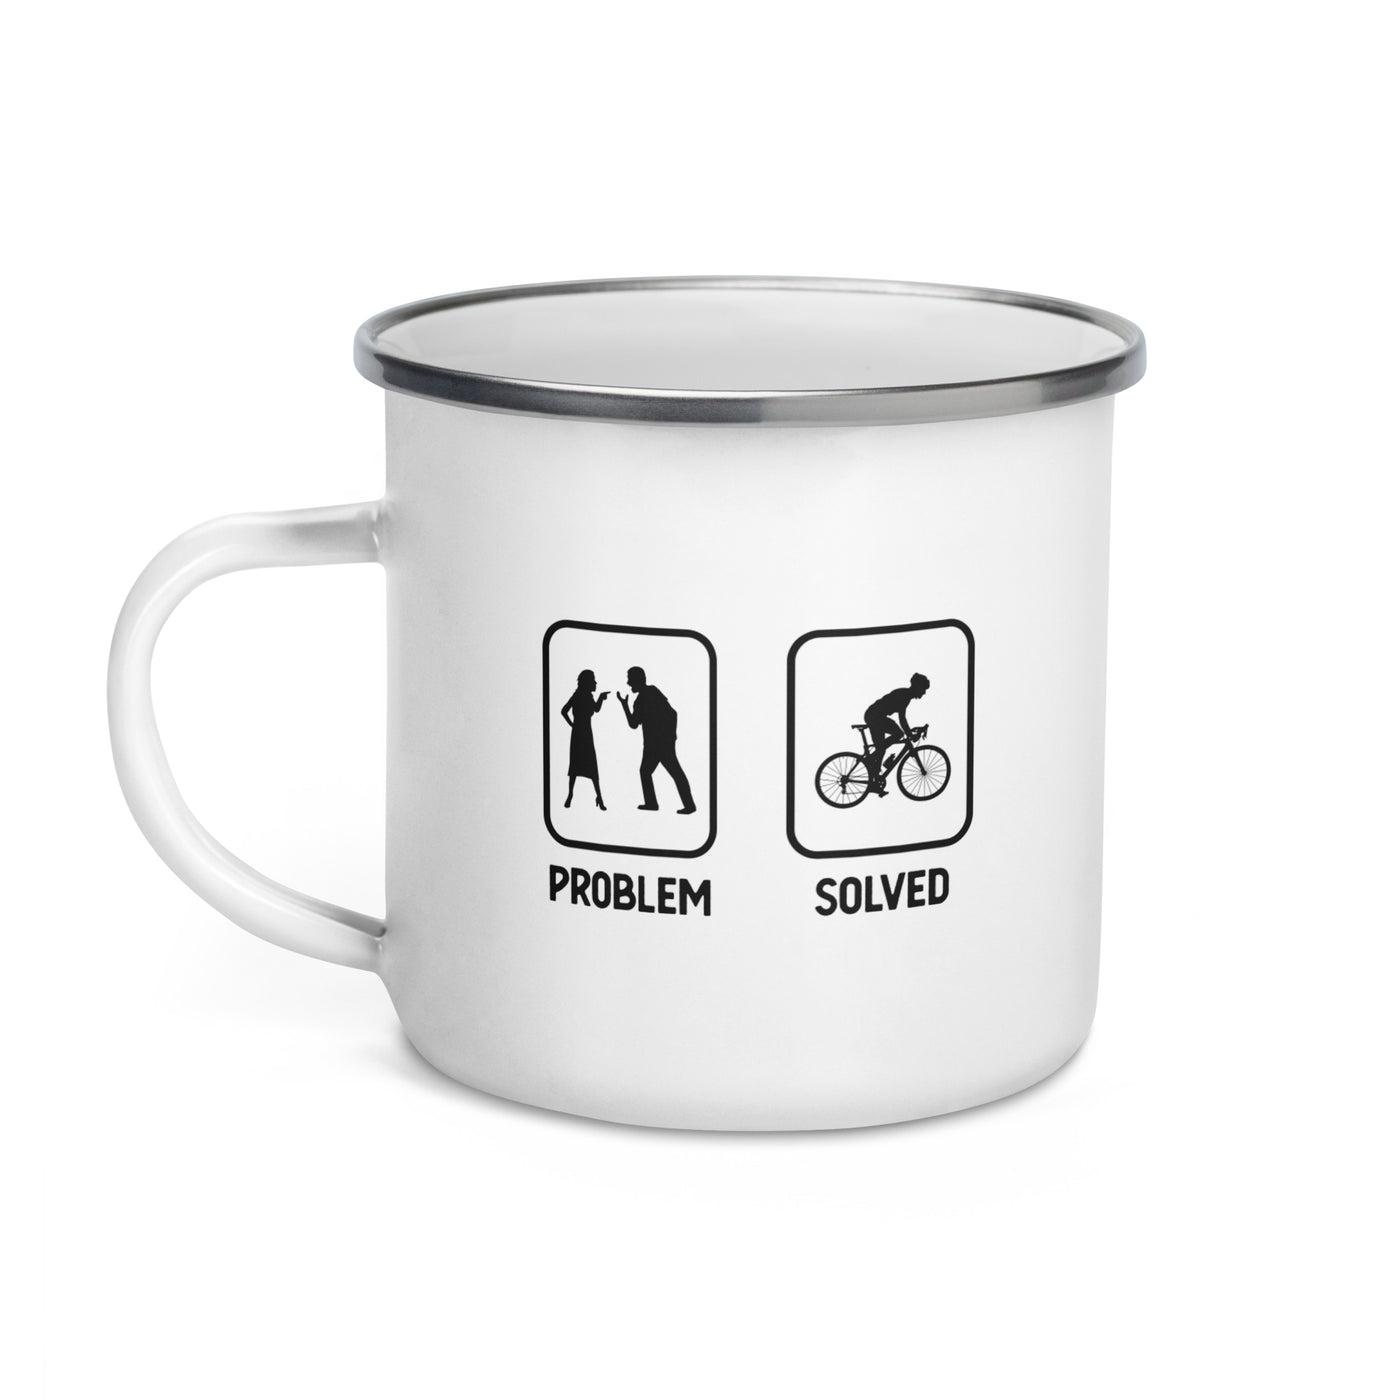 Problem Solved - Guy Cycling - Emaille Tasse fahrrad